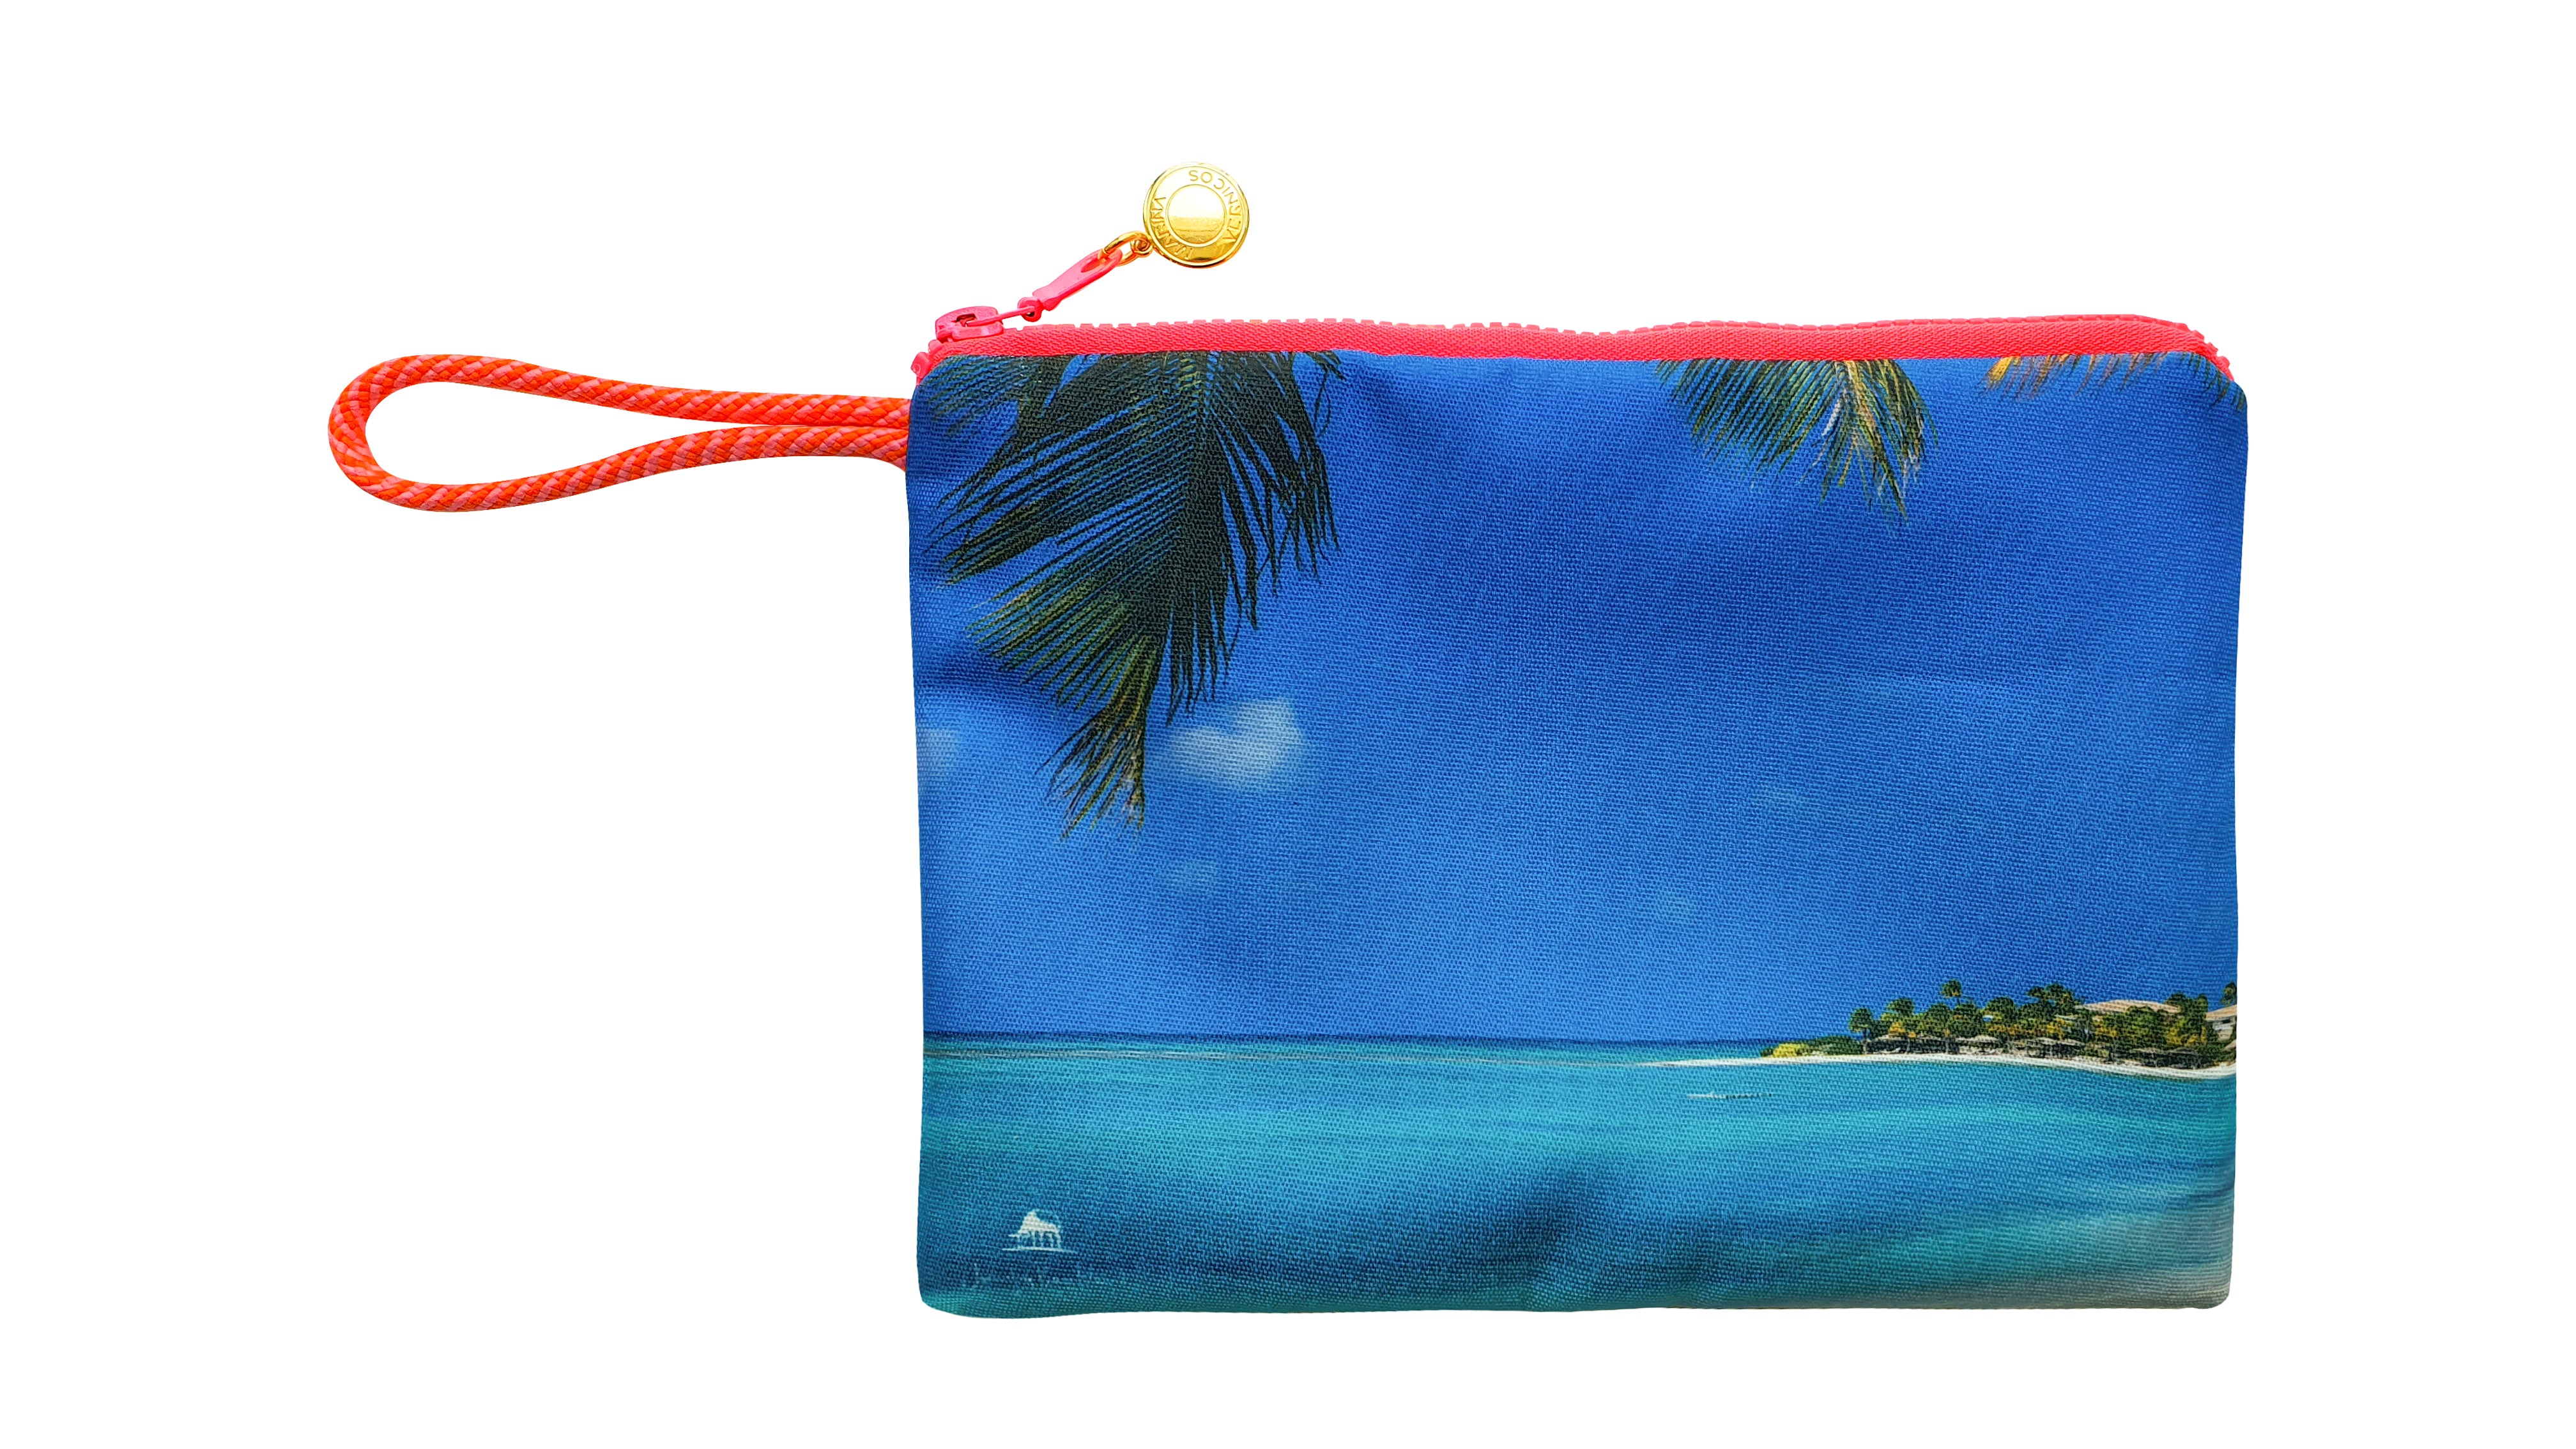 Marina Vernicos Jumby Bay Island Waterproof Beach Pouch - Oekter Collection Hotels Boutique